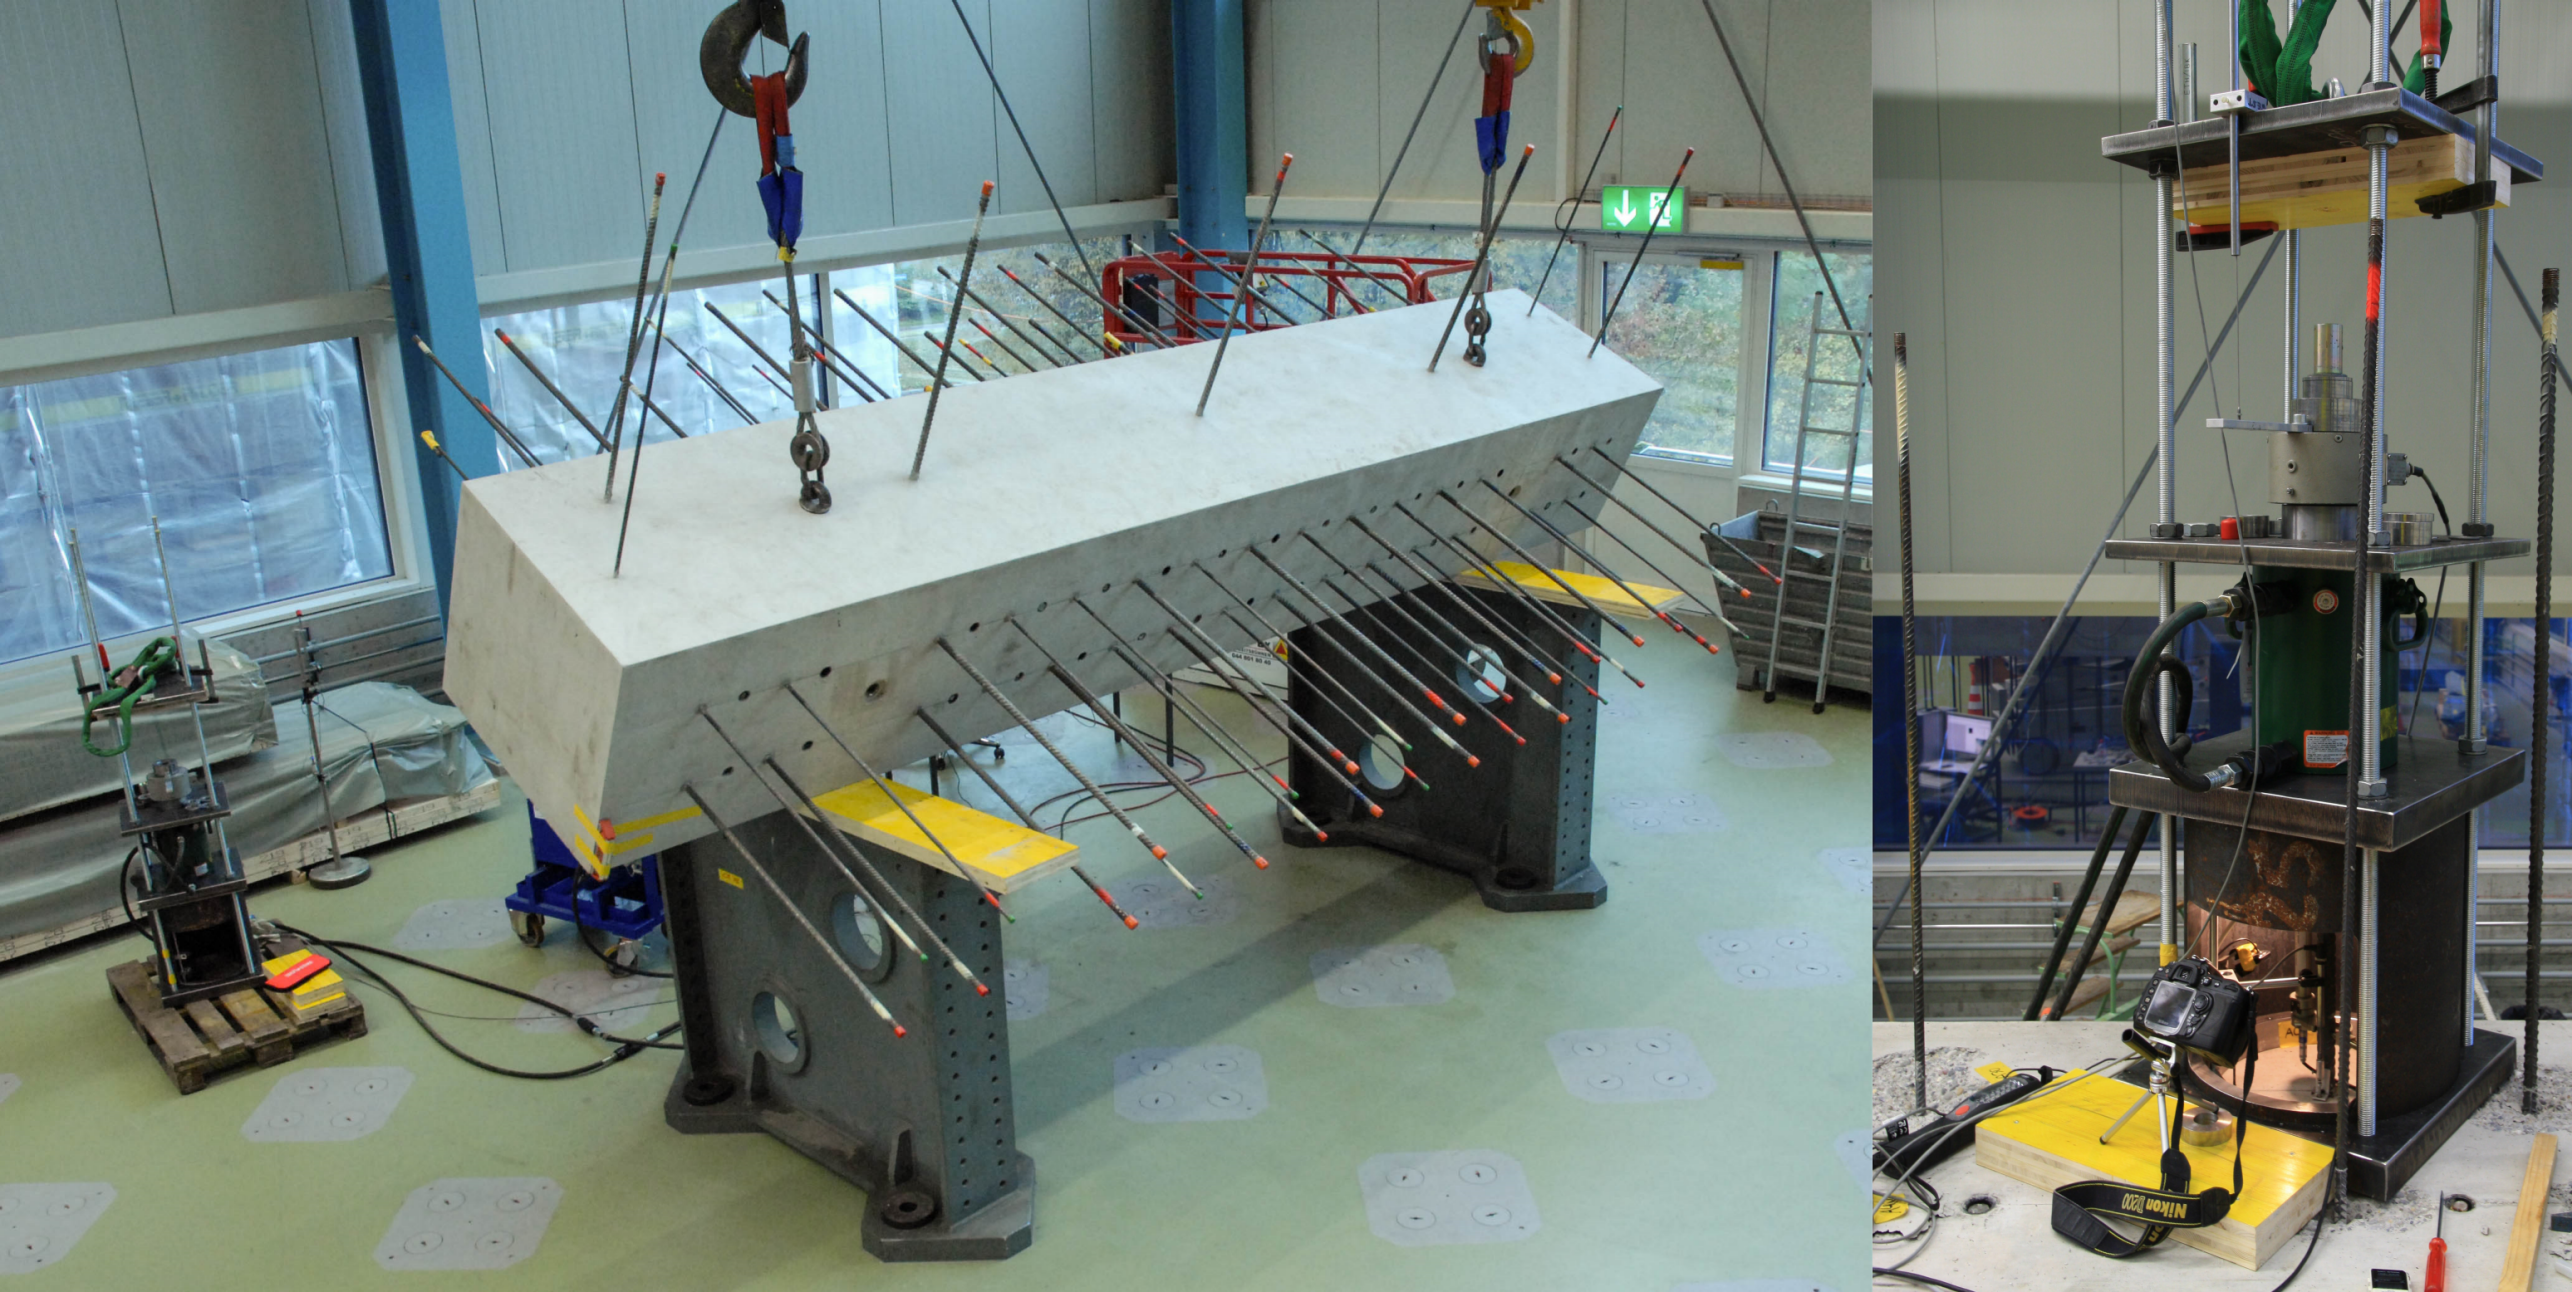 Enlarged view: (left) Test specimen with cast-in rebars with different embedment lengths ; (right) test setup with various measurement equipment.